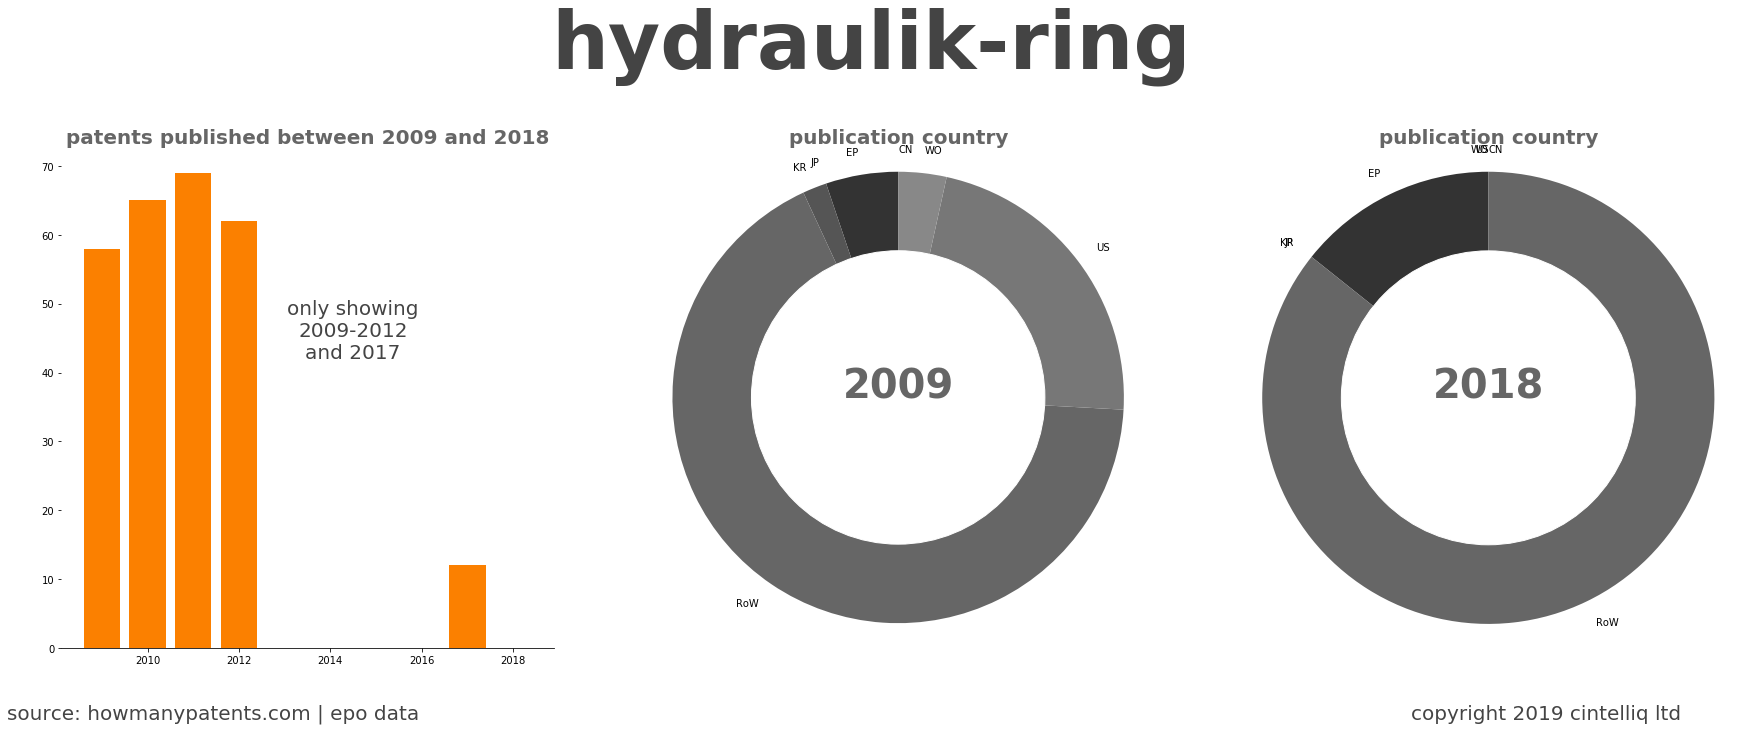 summary of patents for Hydraulik-Ring